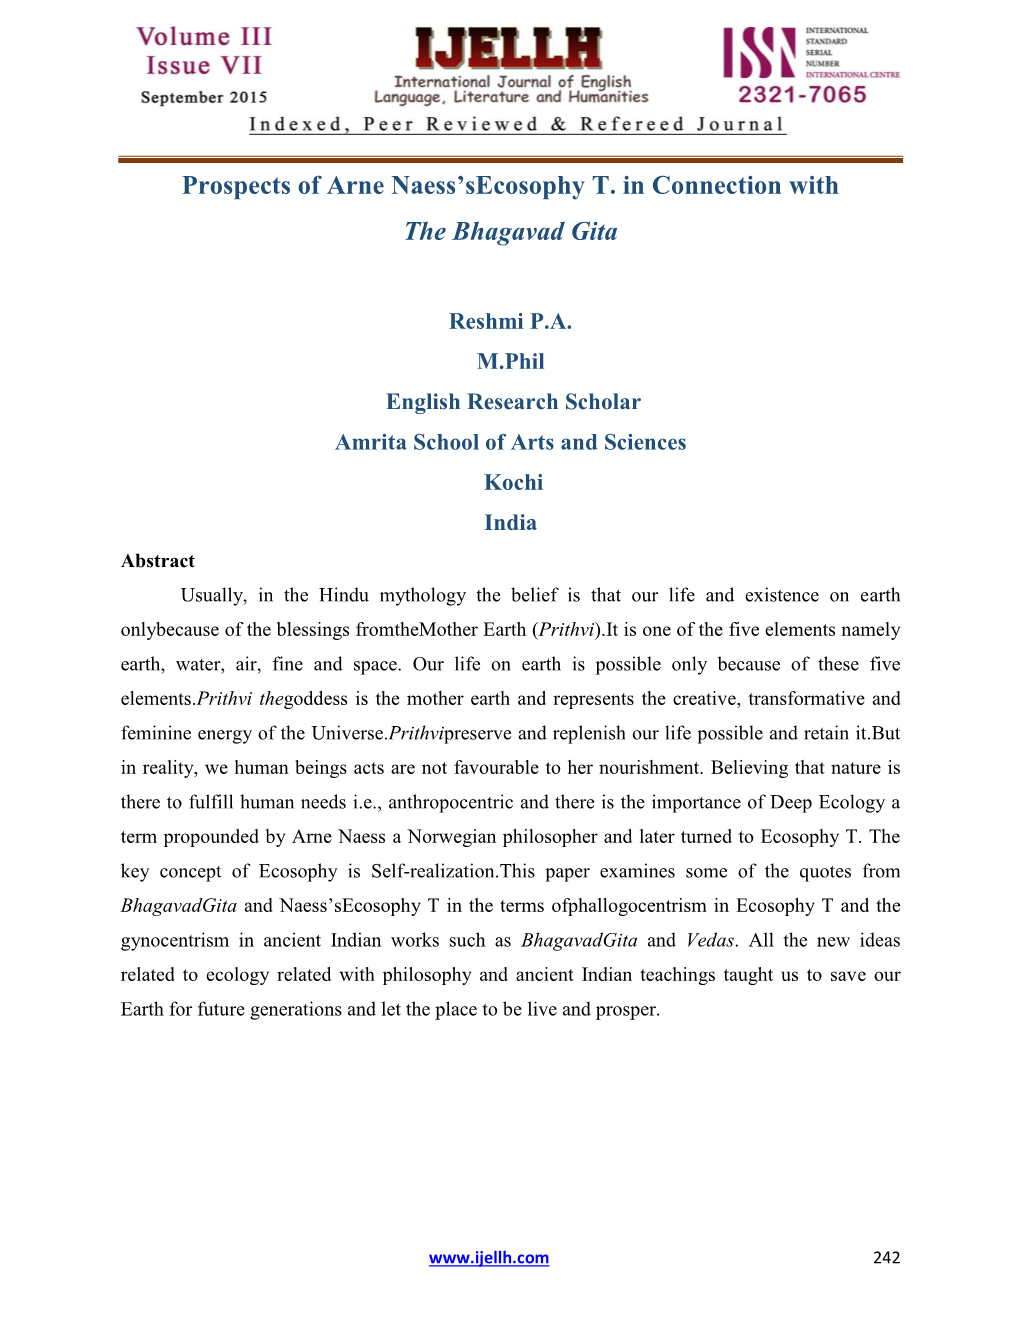 Prospects of Arne Naess'secosophy T. in Connection with The